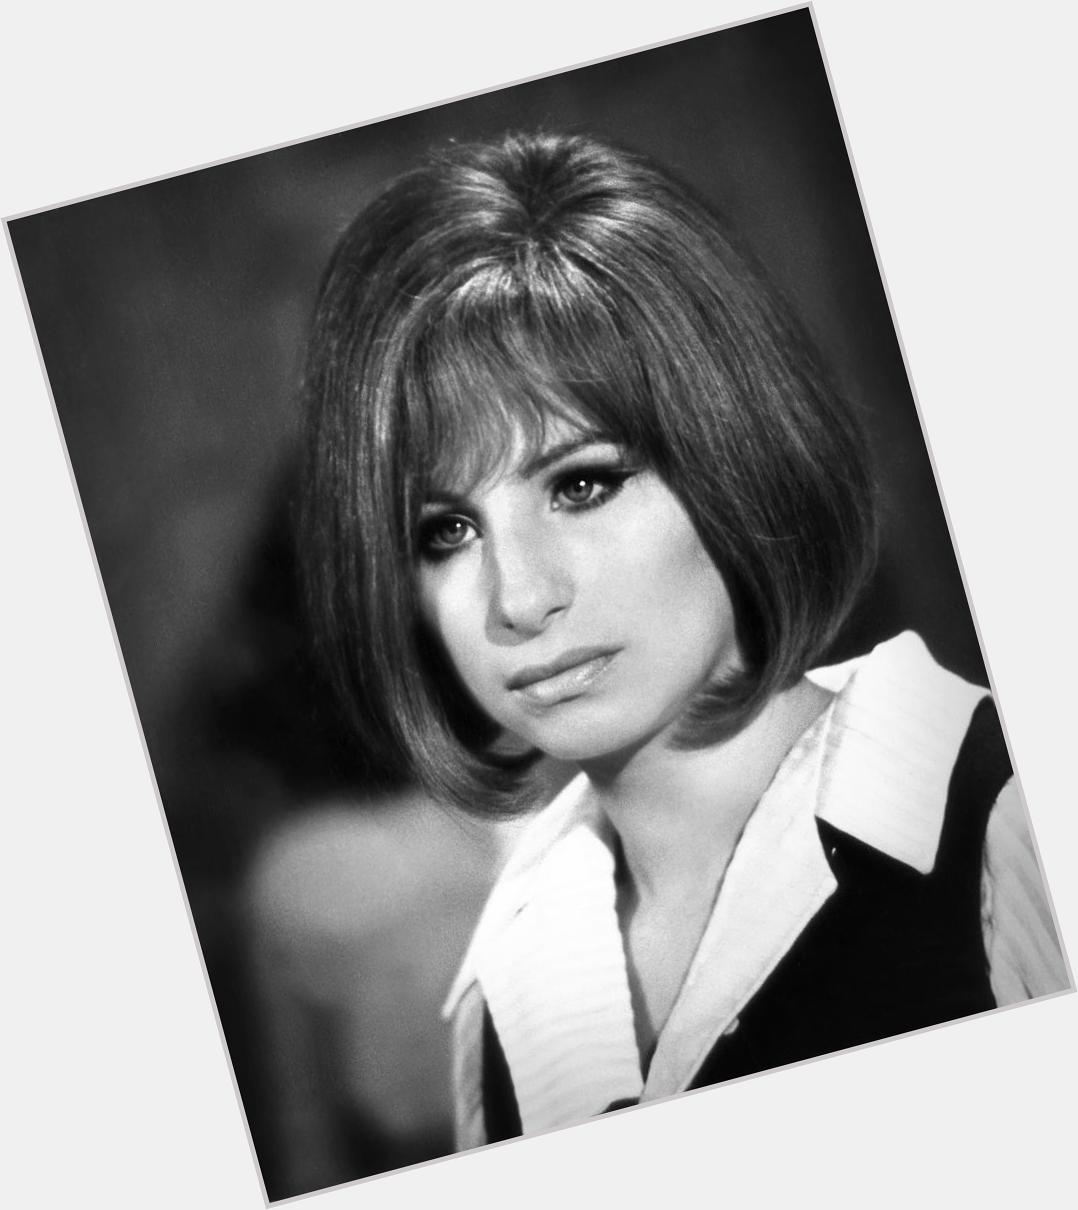 Barbra Streisand in ON A CLEAR DAY YOU CAN SEE FOREVER  1970.  Happy birthday Miss Streisand. 